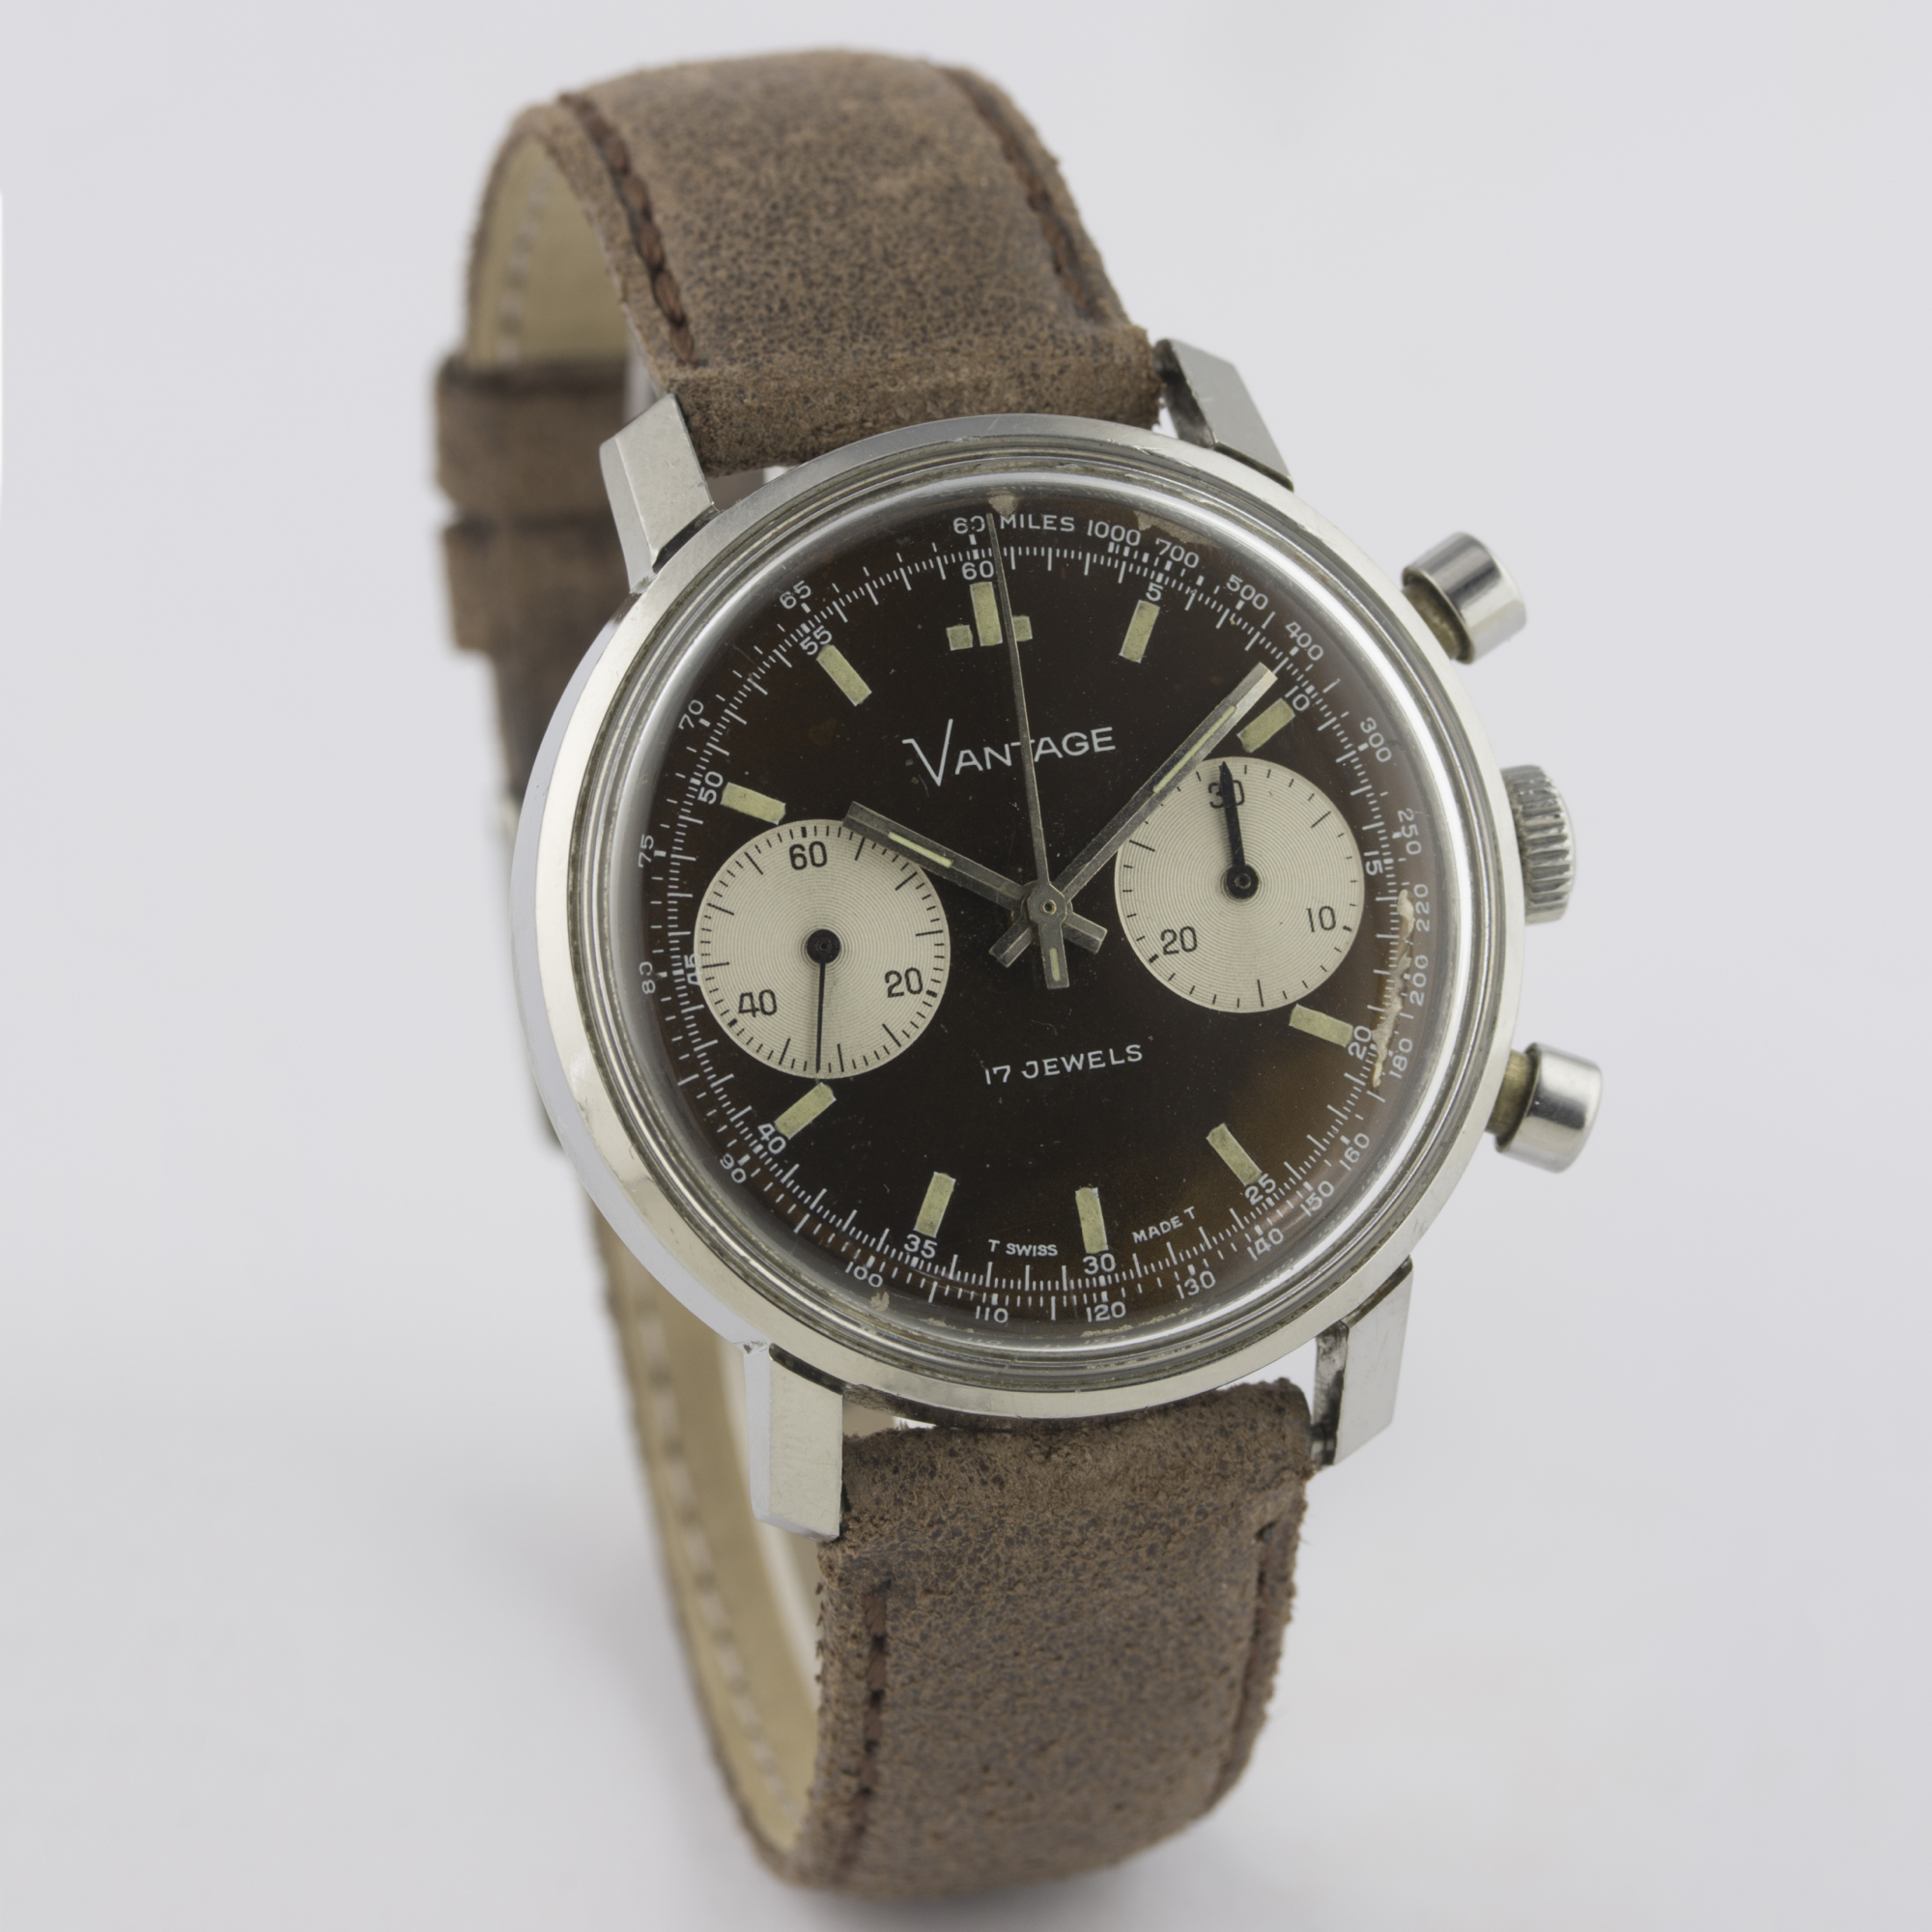 A GENTLEMAN’S STAINLESS STEEL VANTAGE CHRONOGRAPH WRIST WATCH CIRCA 1970 WITH "CHOCOLATE" DIAL D: - Image 5 of 8